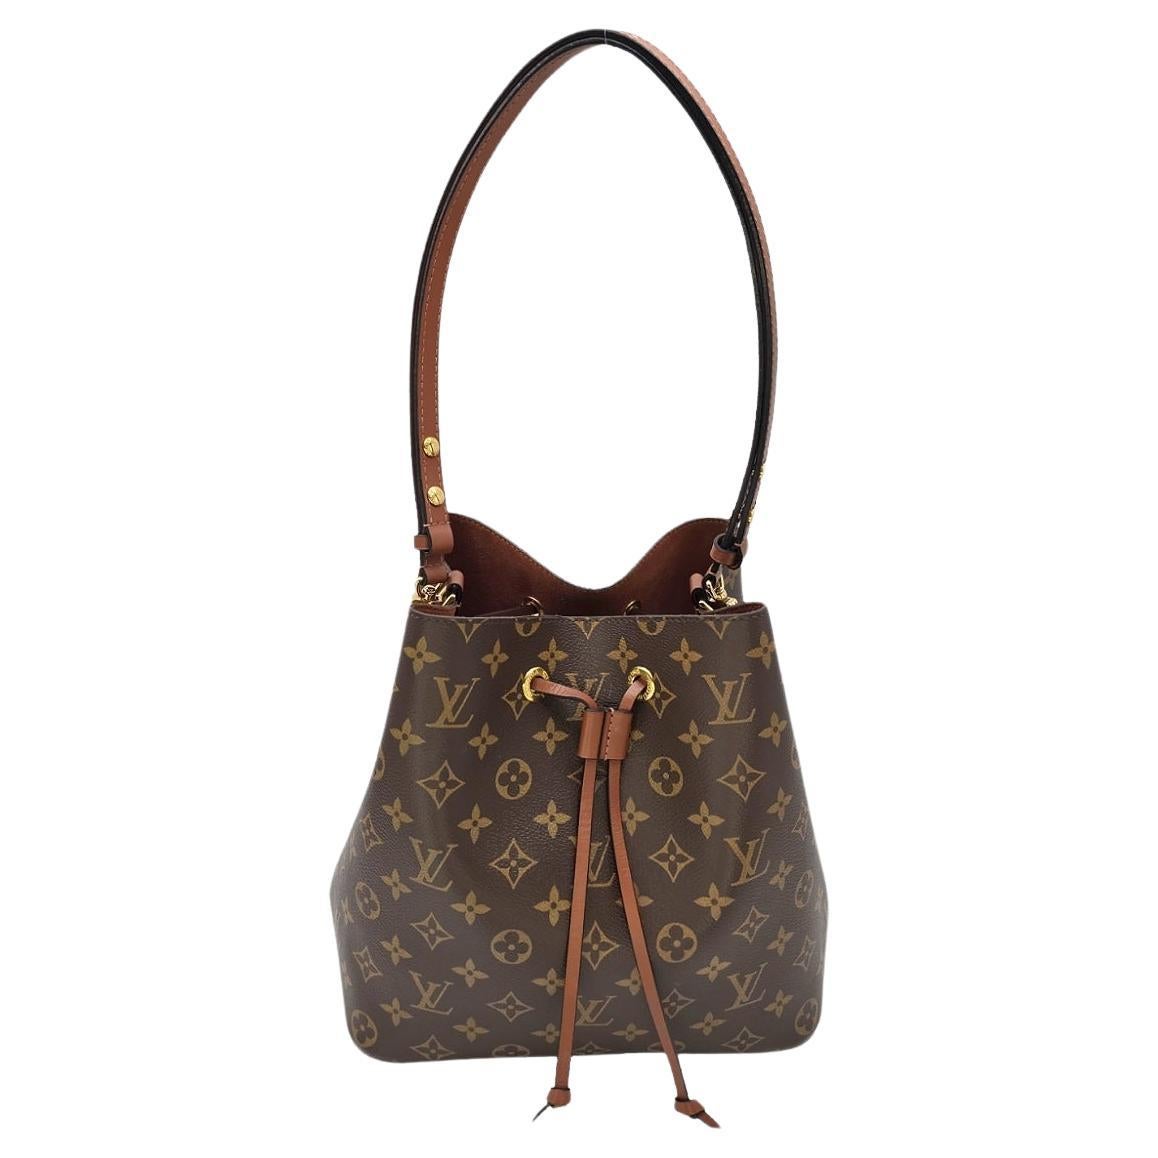 How can I protect Louis Vuitton canvas?